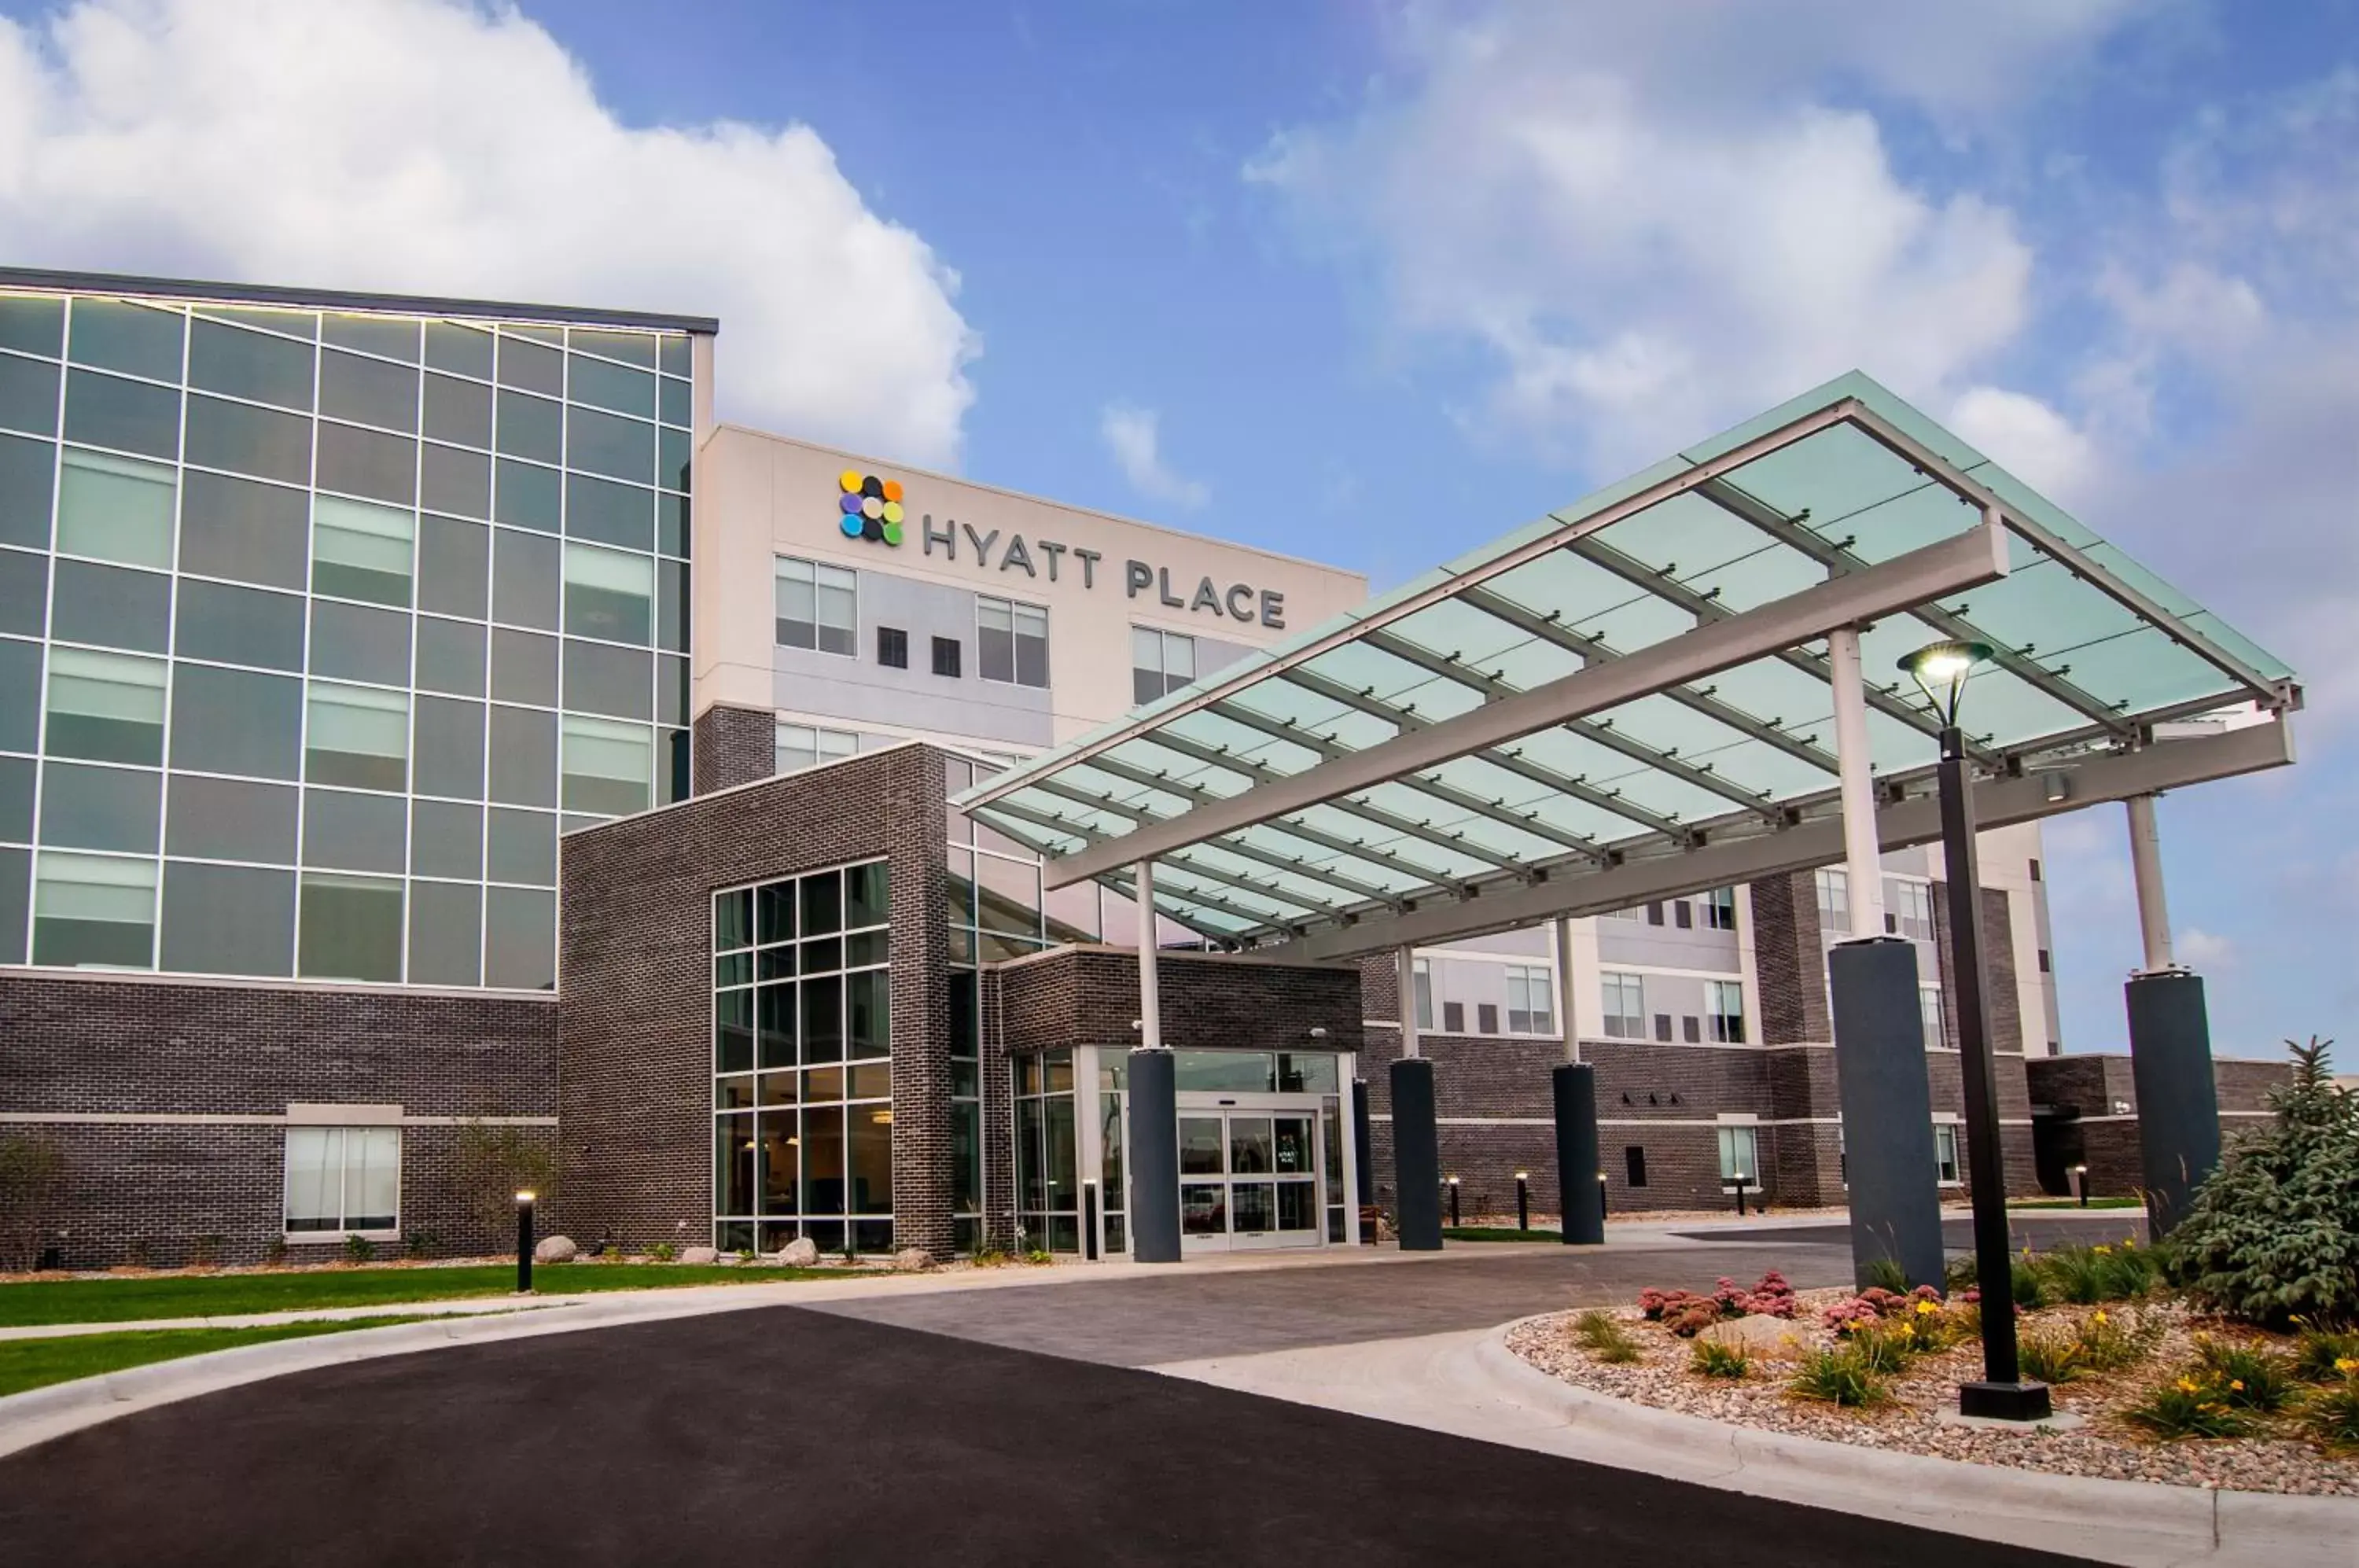 Property Building in Hyatt Place Sioux Falls South